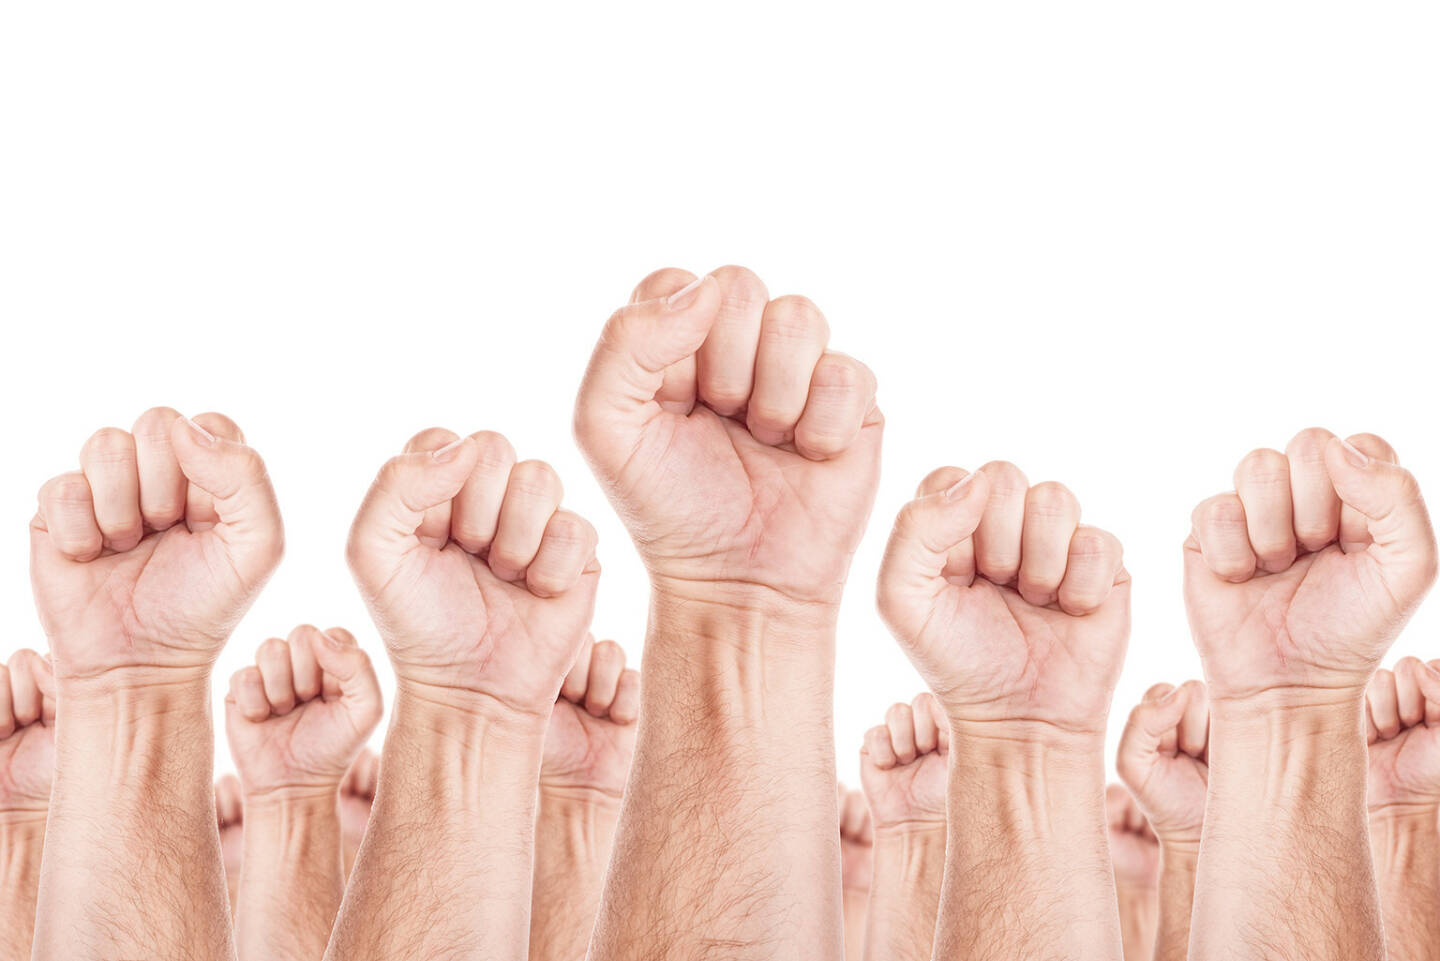 Gewerkschaft, Arbeitskampf, Streik, Protest, Faust, Fäuste -  http://www.shutterstock.com/de/pic-241610767/stock-photo-labour-movement-workers-union-strike-concept-with-male-fists-raised-in-the-air-fighting-for-their.html